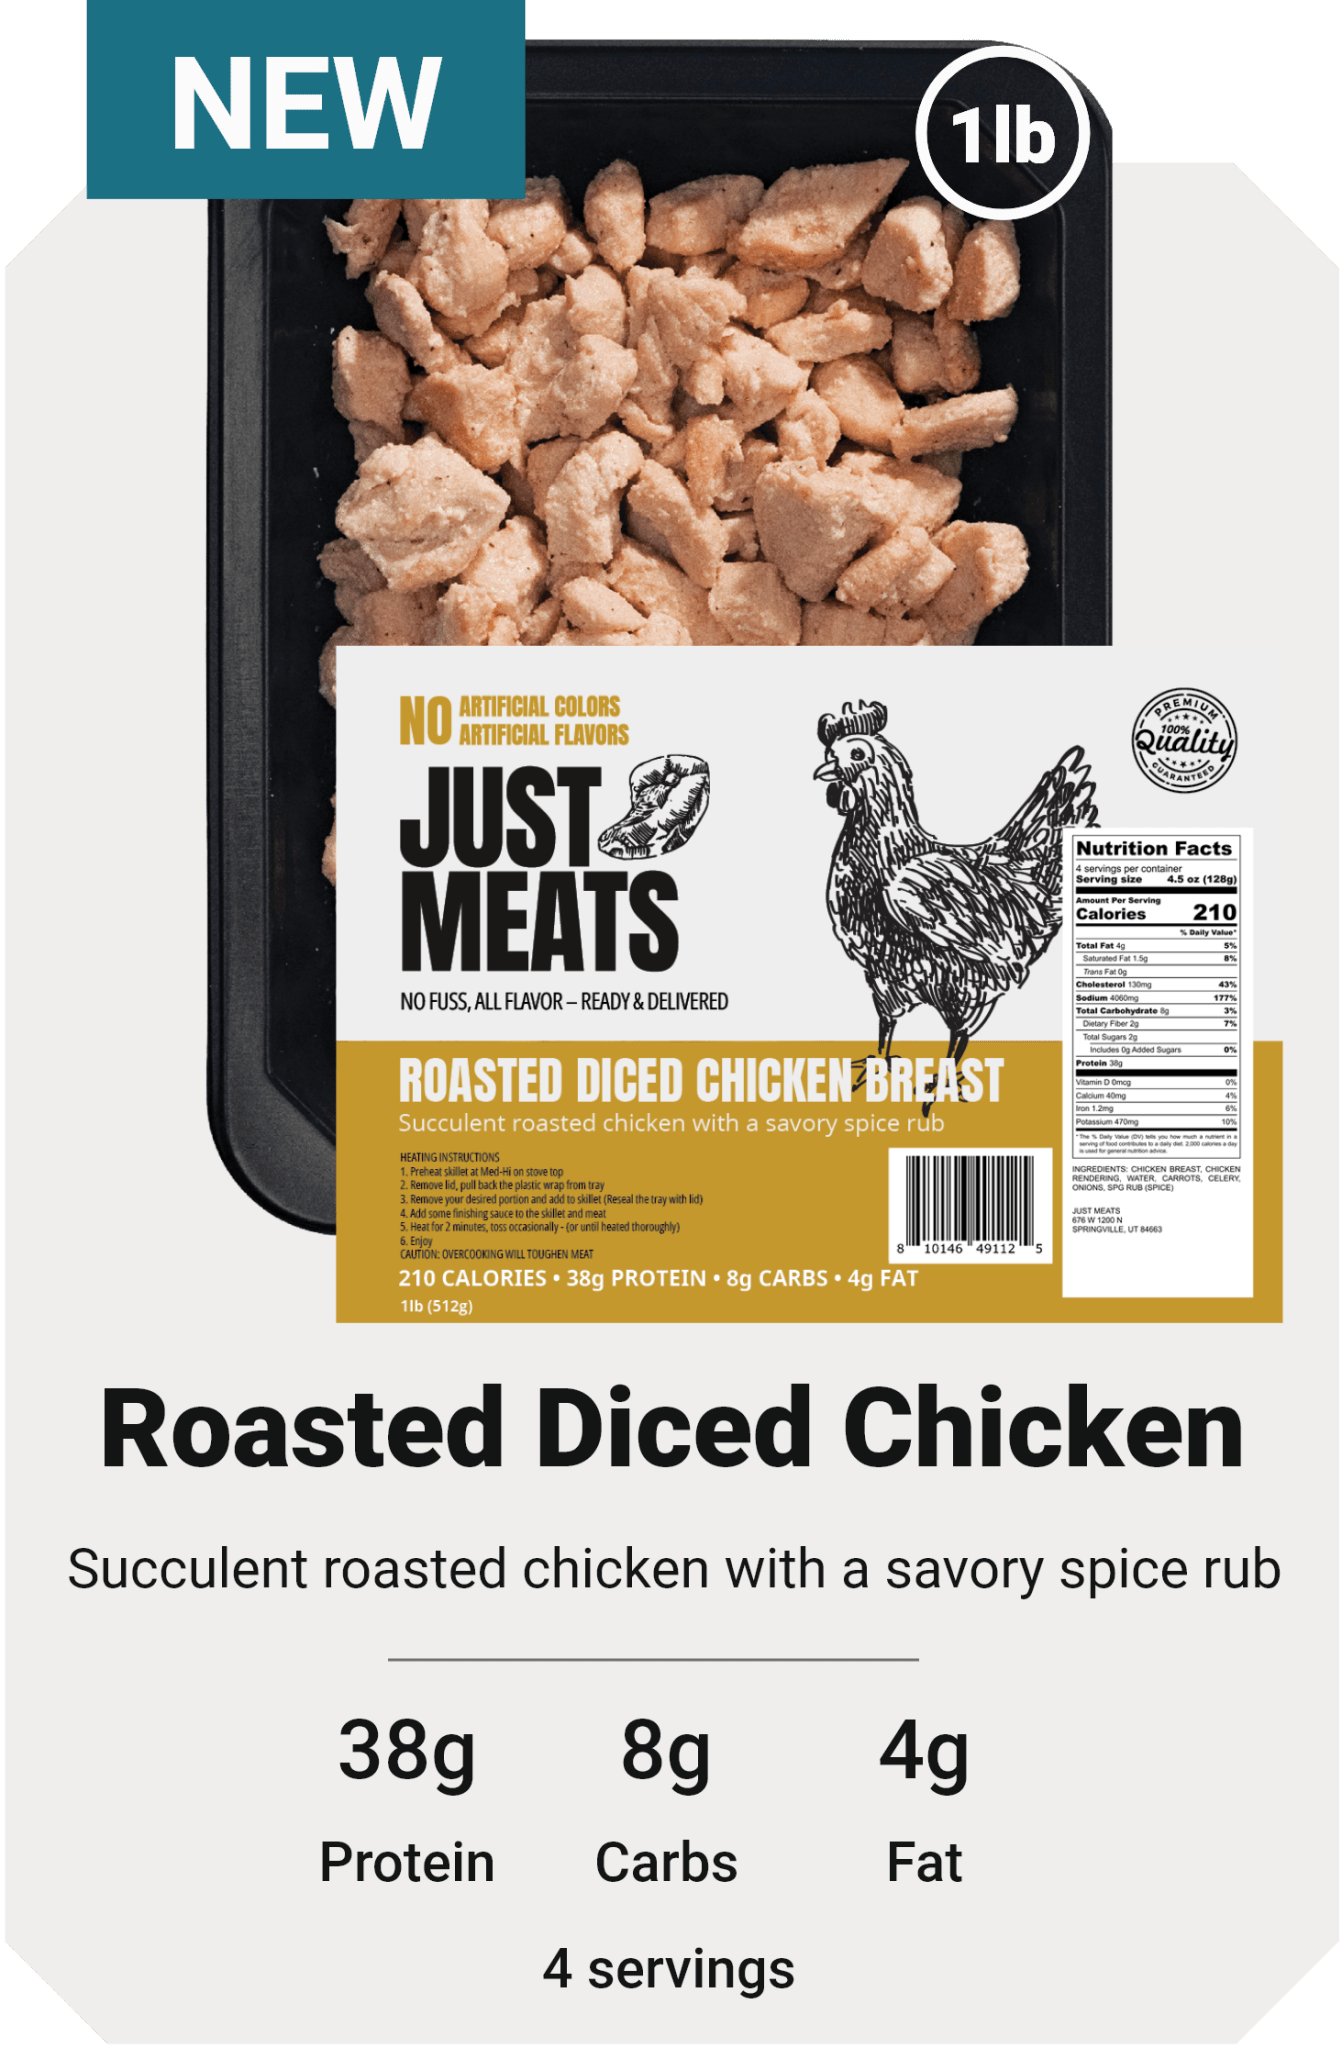 Roasted Diced Chicken